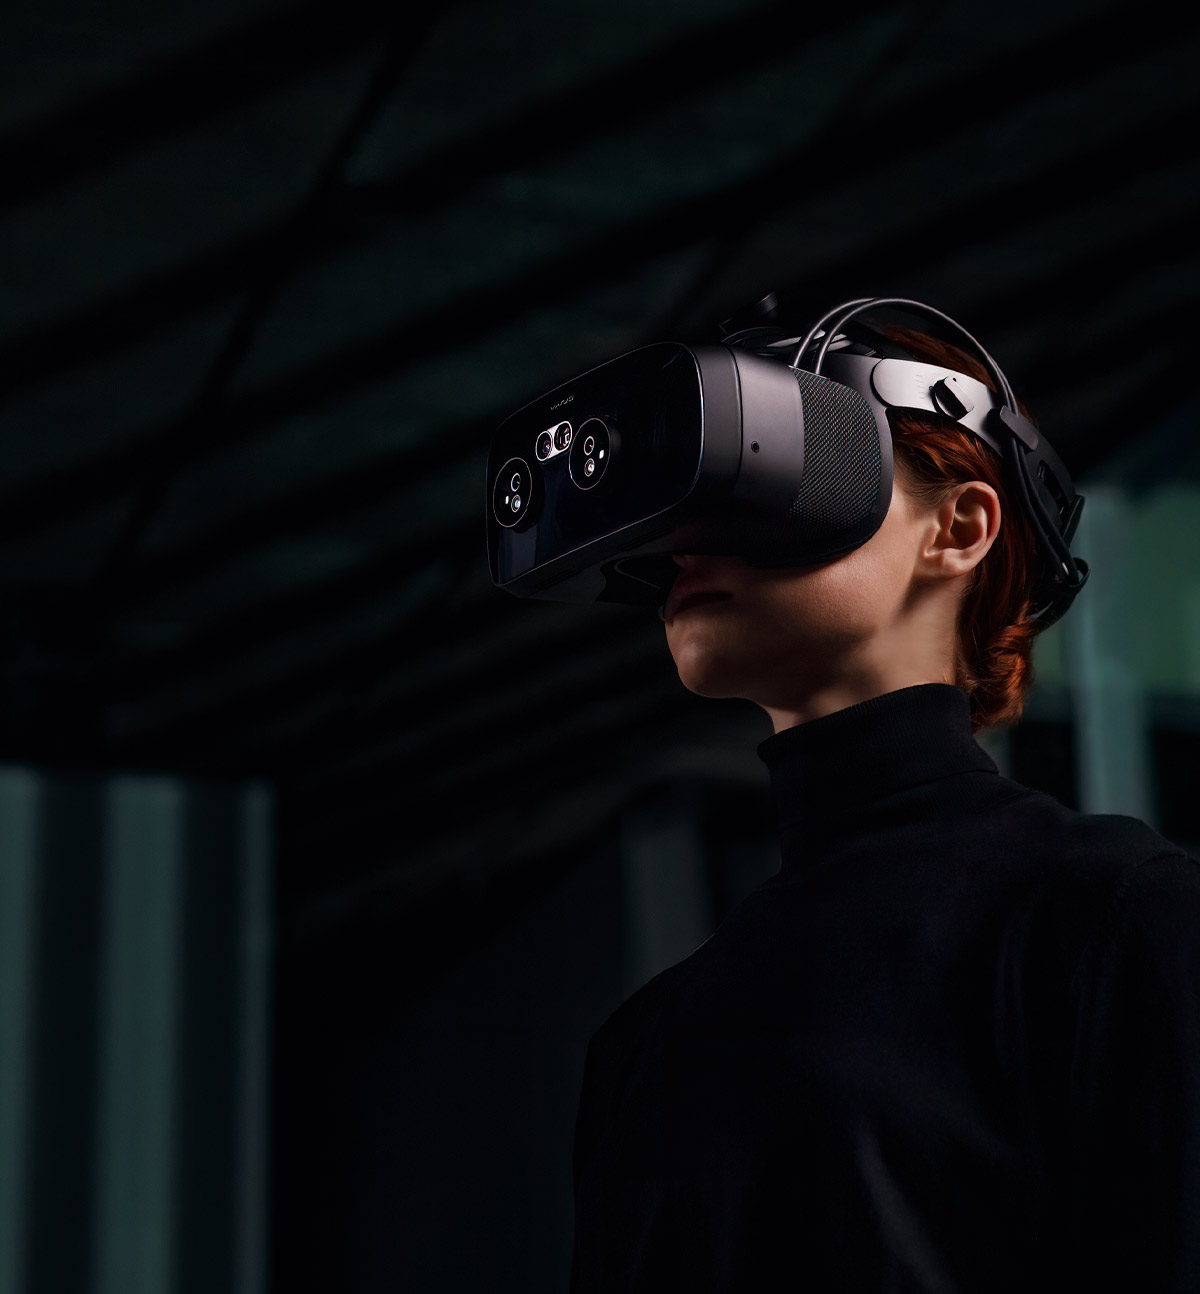 But for mixed reality to be valuable, it’s got to be convincing – blending real and virtual to the point that it’s impossible to tell where reality ends and the virtual world begins. Varjo is the only device that’s ever been able to do that.